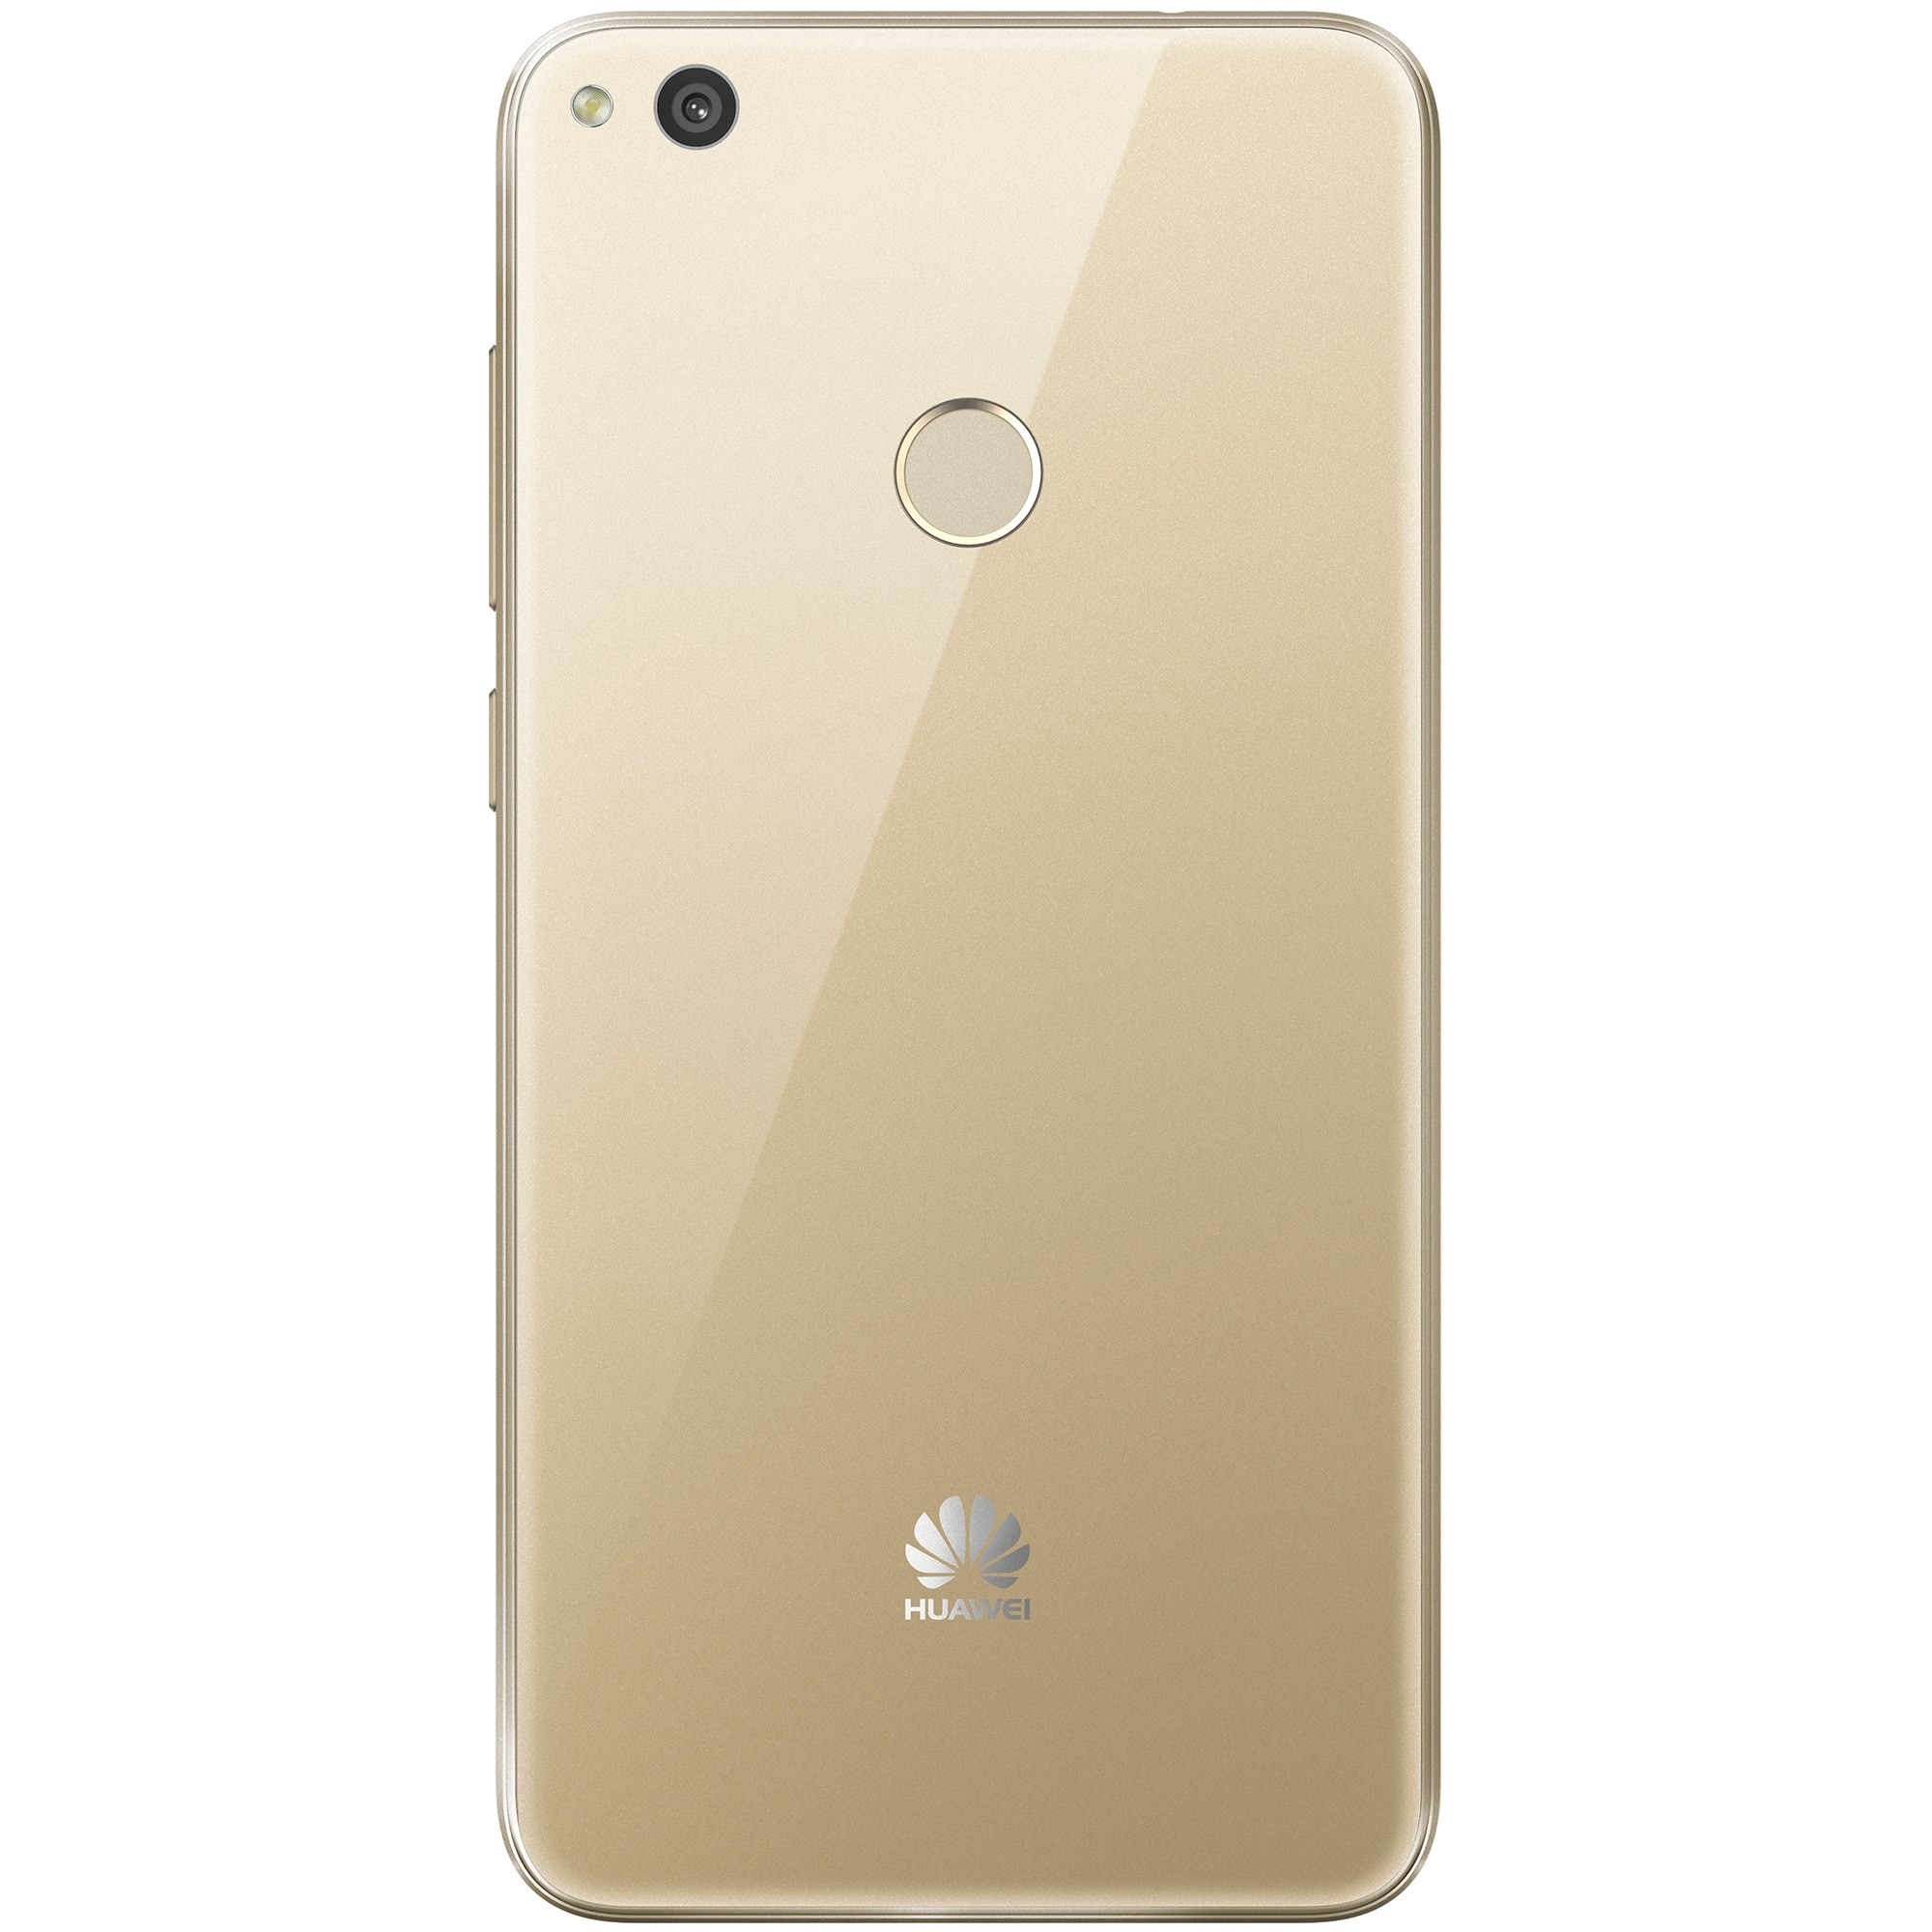 Governor reap Current Huawei P9 Lite 2017. Telefon Mobil, Dual Sim, 16GB, 4G, Gold - eMAG.ro